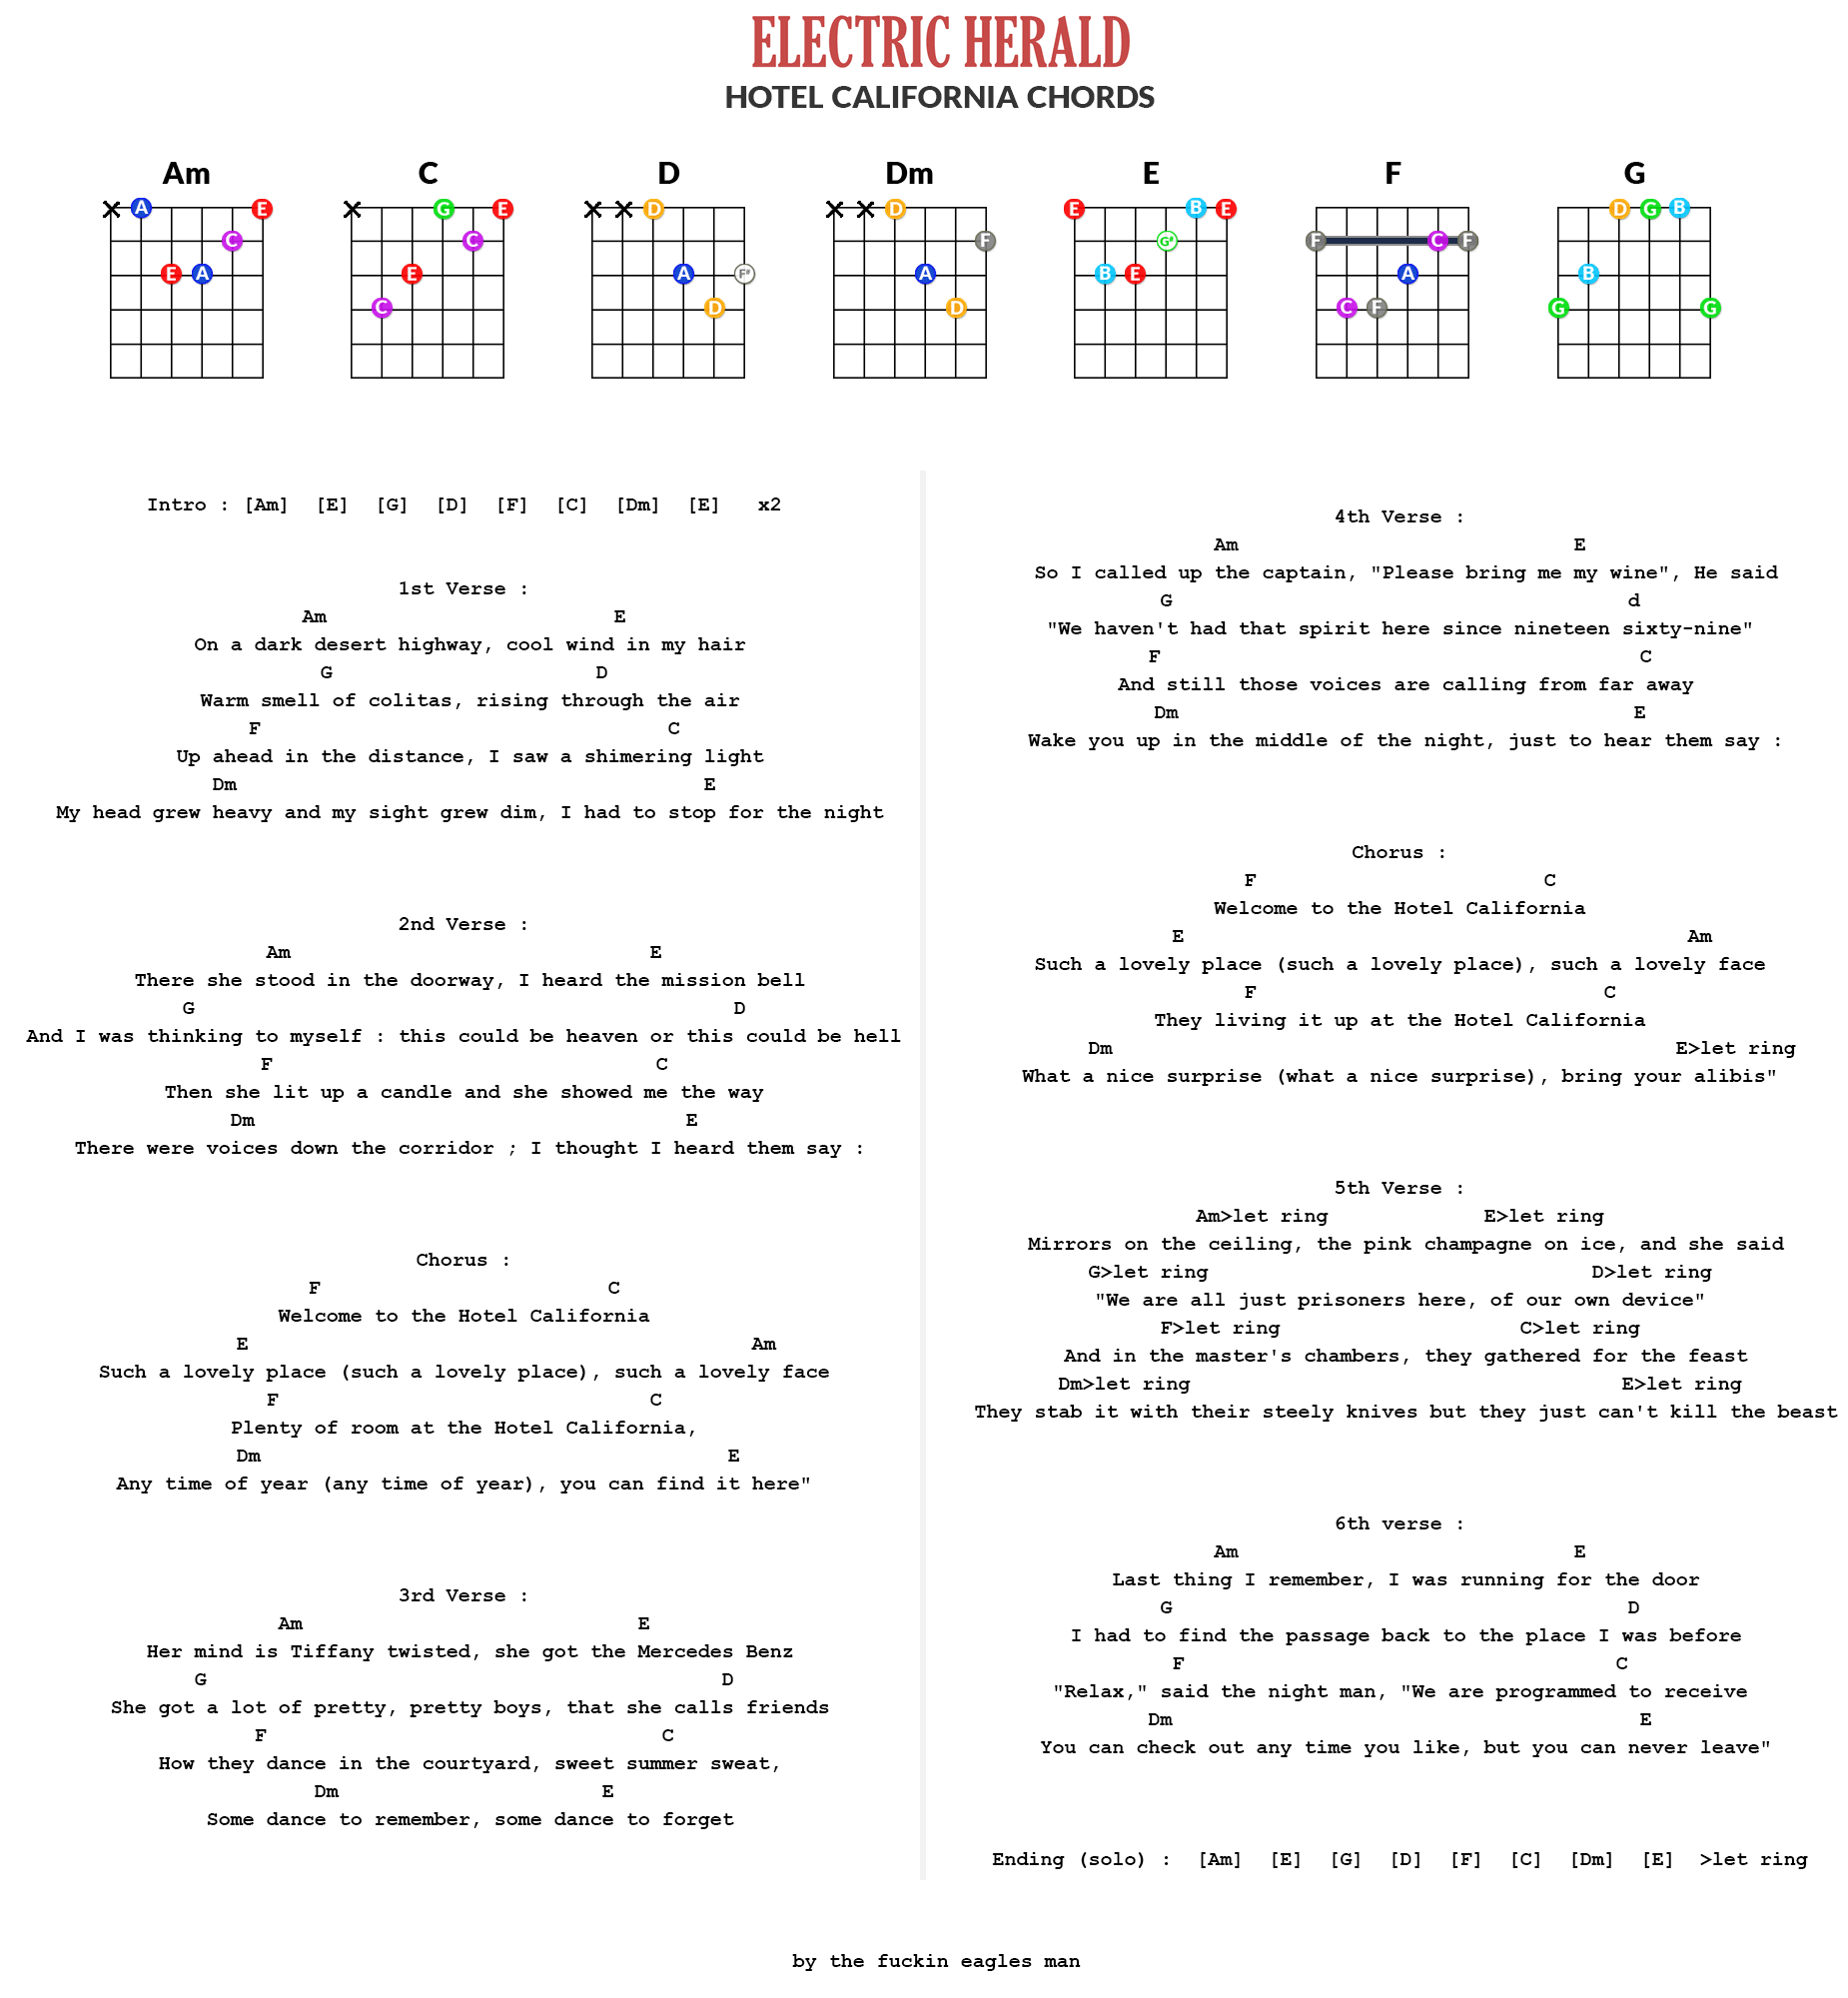 Hotel California Chords Online Guitar Chords Chart Free App Electric Herald